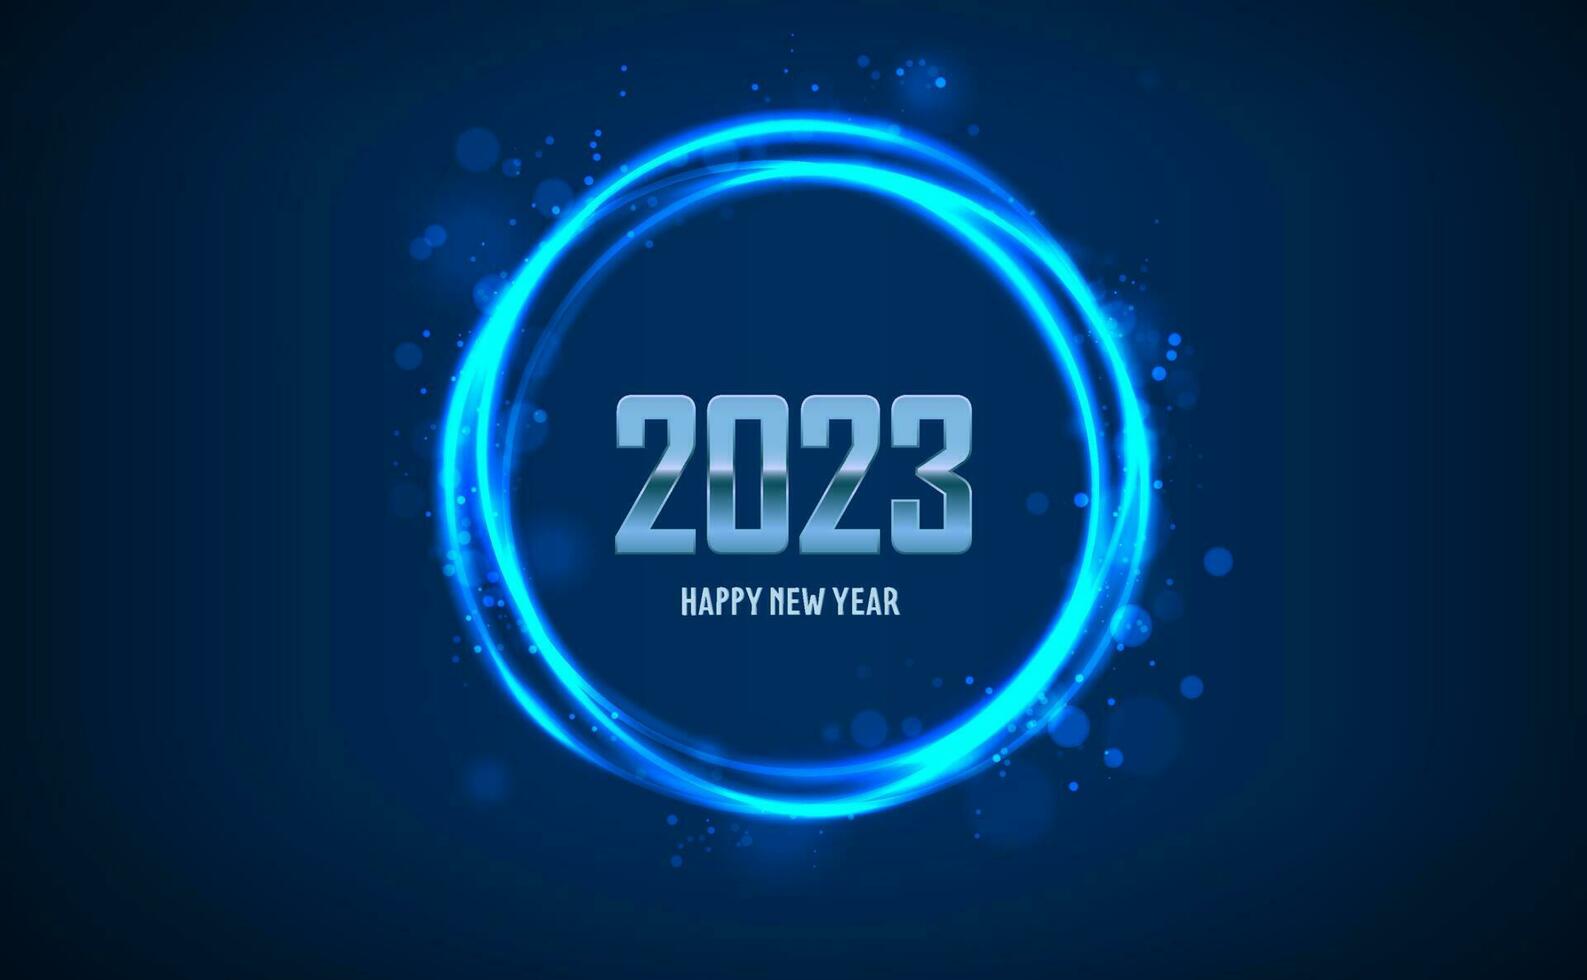 Vector illustration Merry Christmas and happy new year background. Holiday greeting banner, flyer and card. 2023 portal flair round circle with sparkles and glow in the dark.